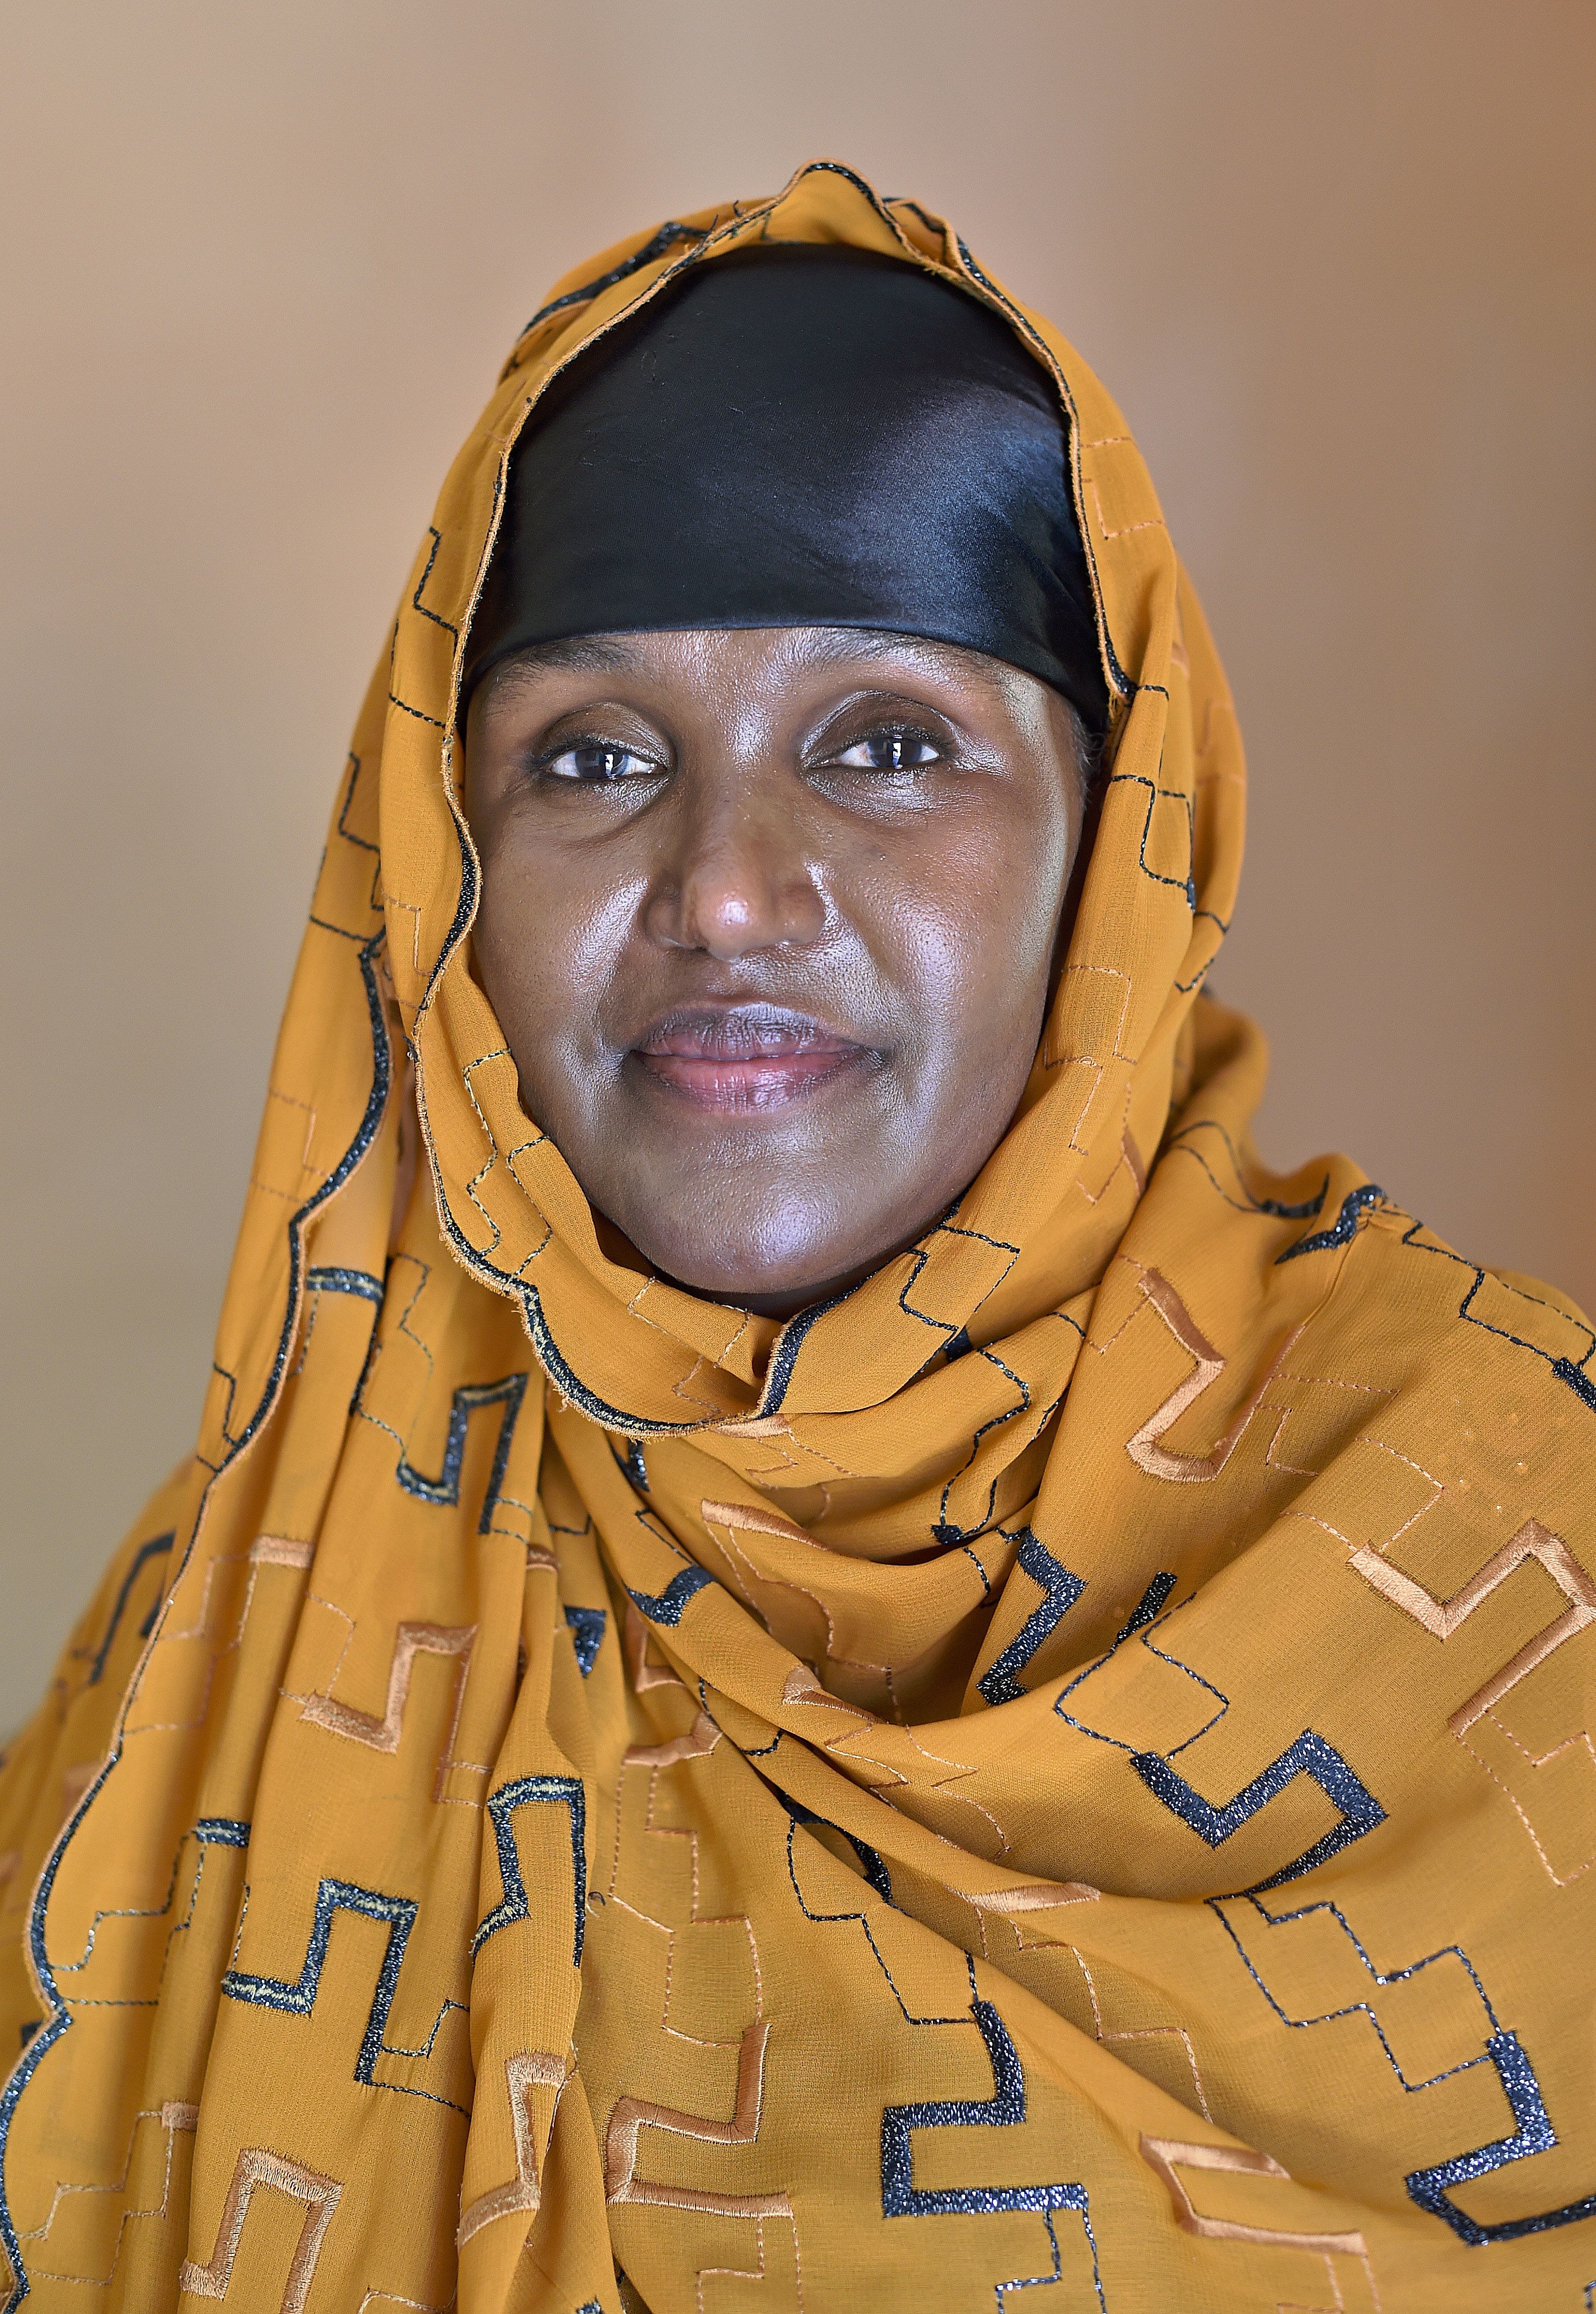 Fartuun Adan, who runs the Elman Peace and Human Rights Centre in Mogadishu where survivors of sexual violence can find refuge, medical care and support, poses on March 24, 2015.